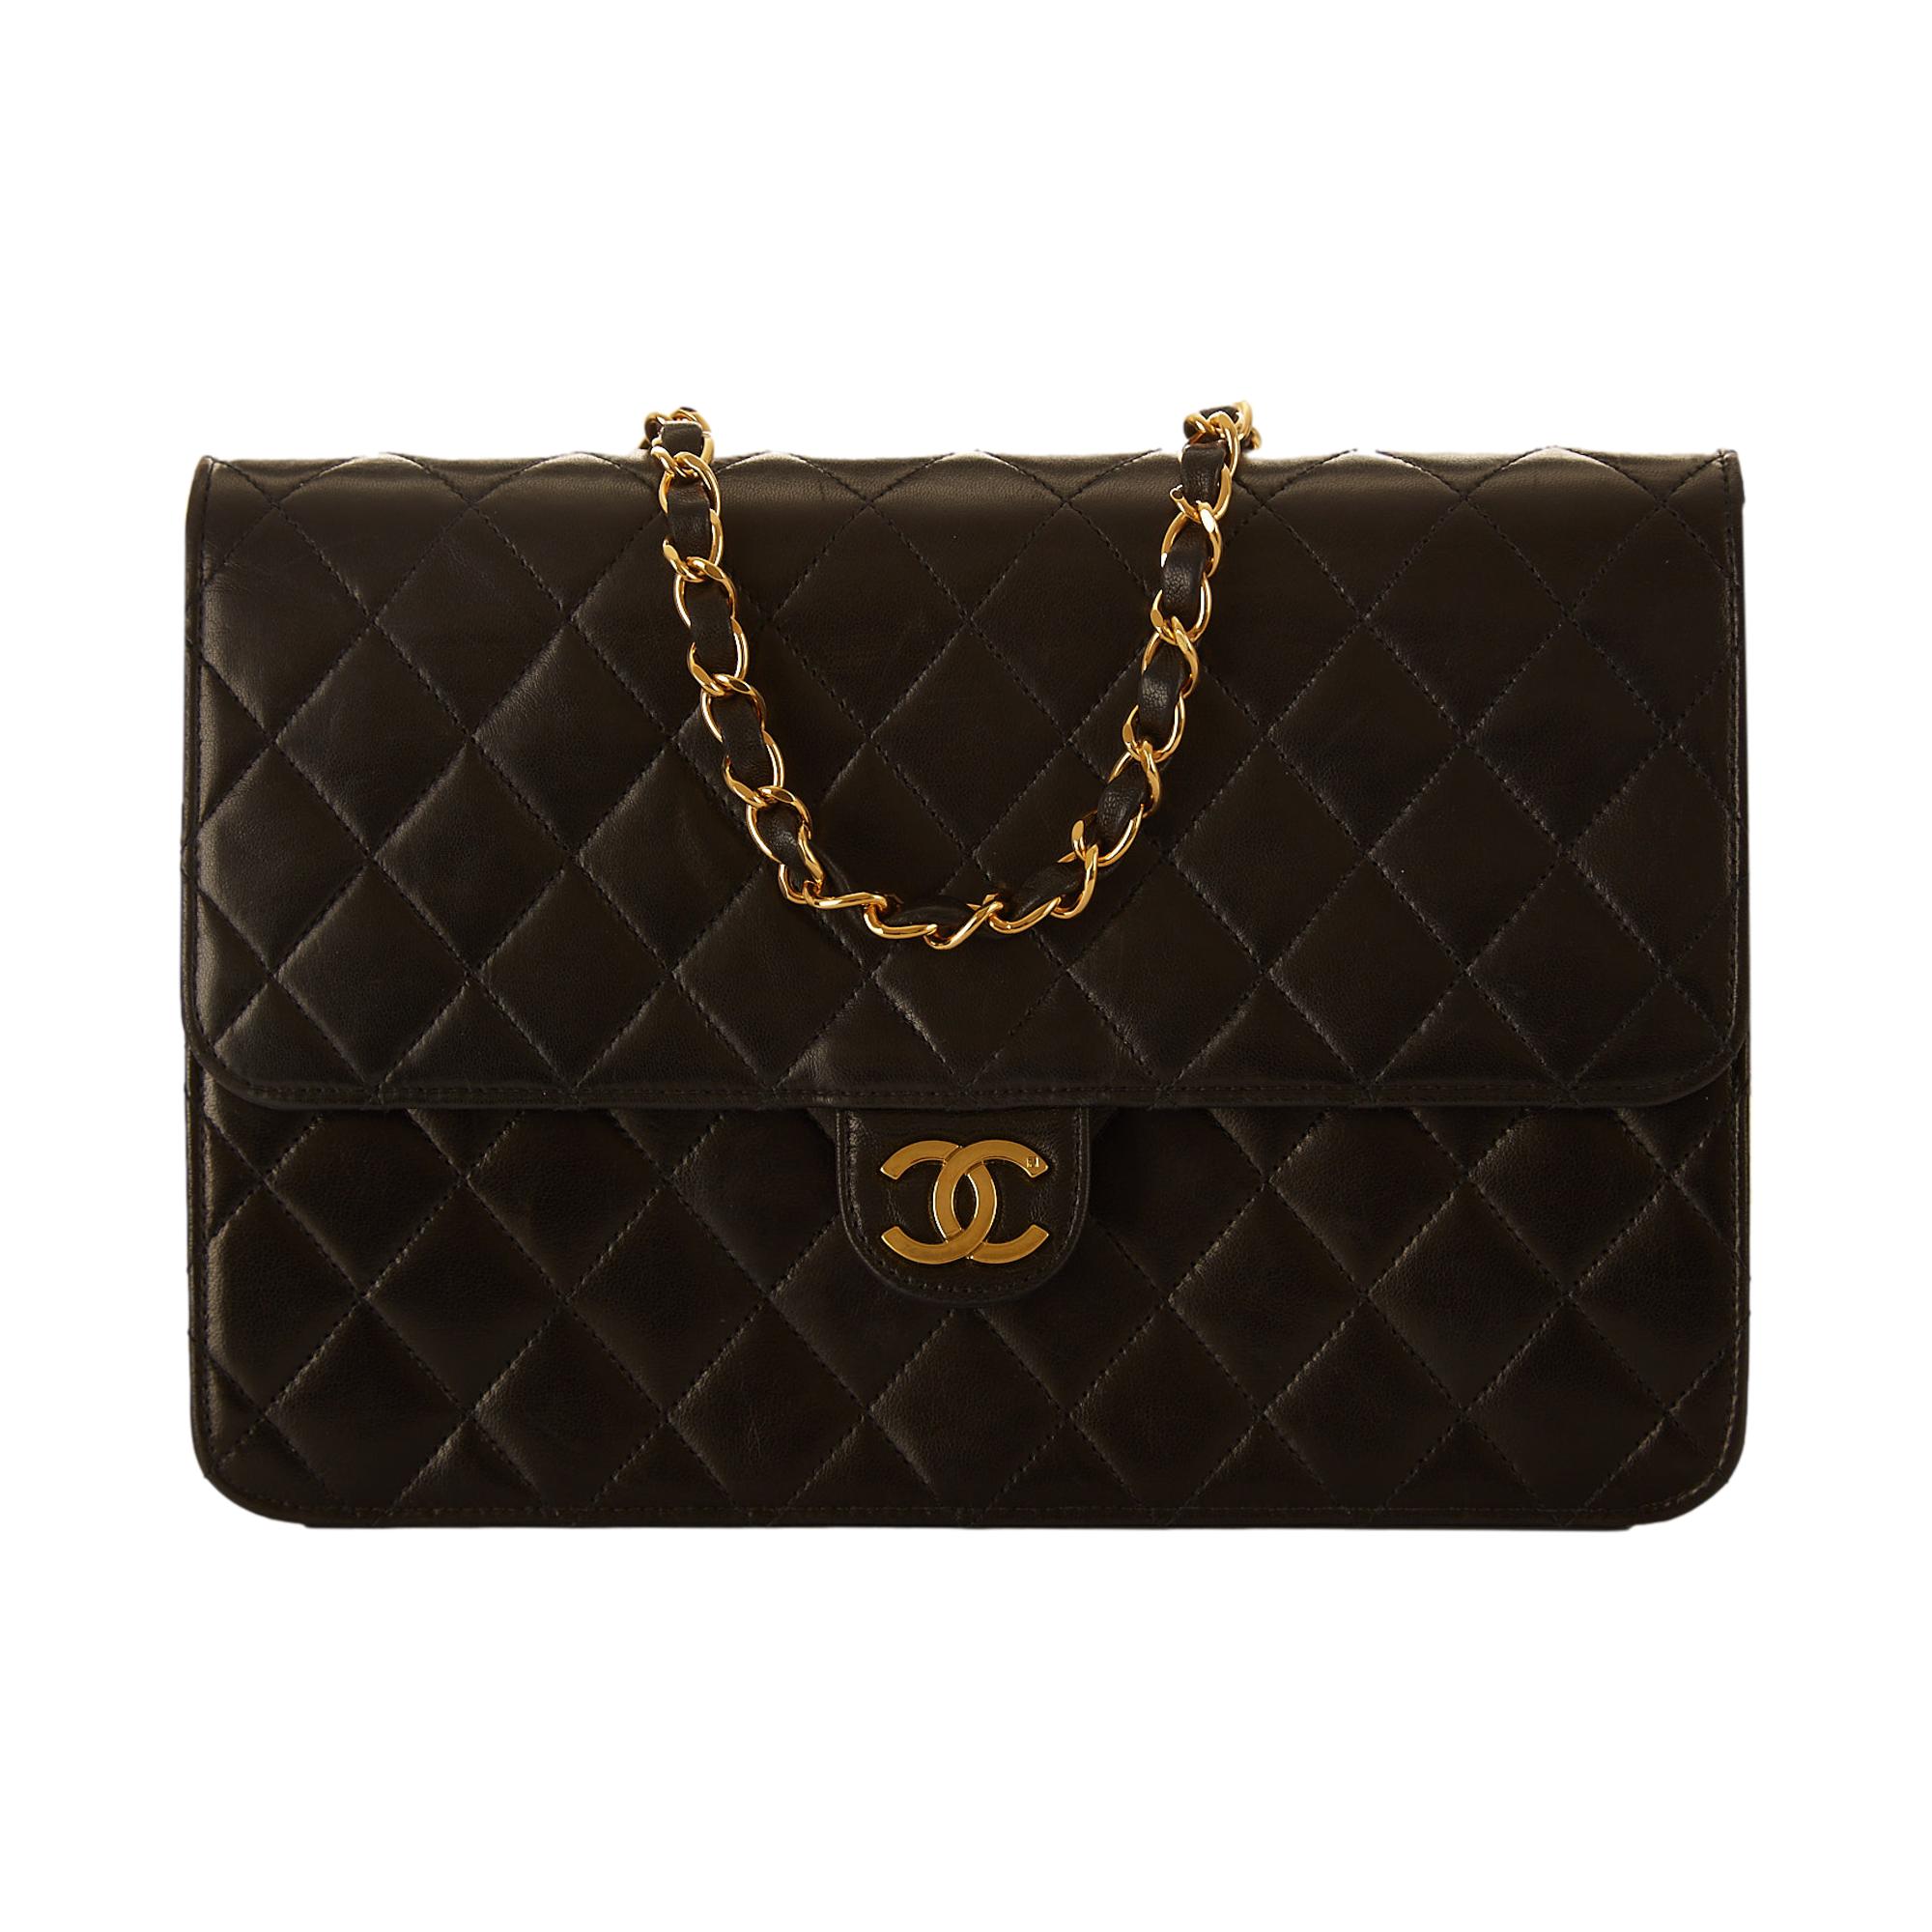 CHANEL CHAIN AROUND MESSENGER BAG, black quilted leather with